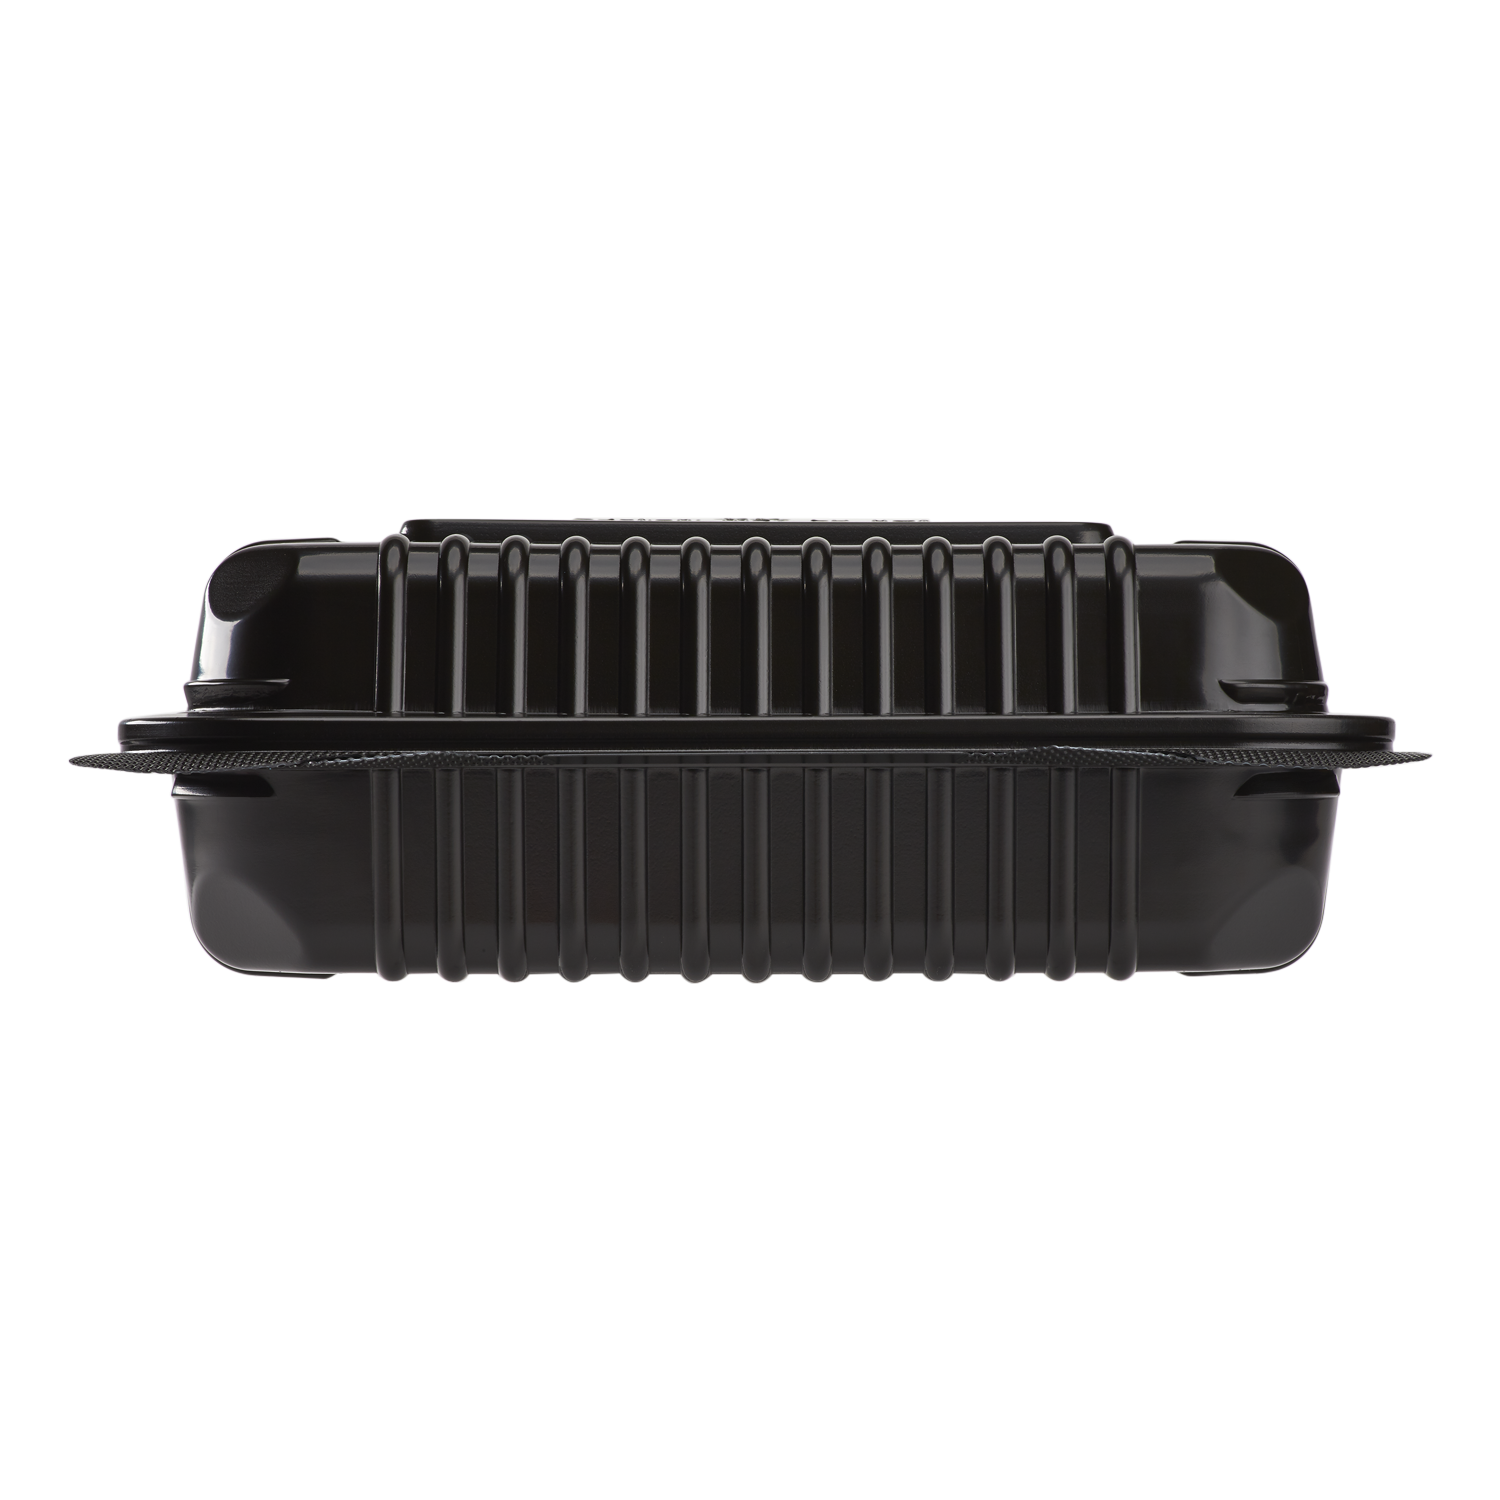 9 x 6-1/2 rectangular clamshell hinged lid plastic take-out container -  TG-PM-96 – Gator Chef Restaurant Equipment & Supplies